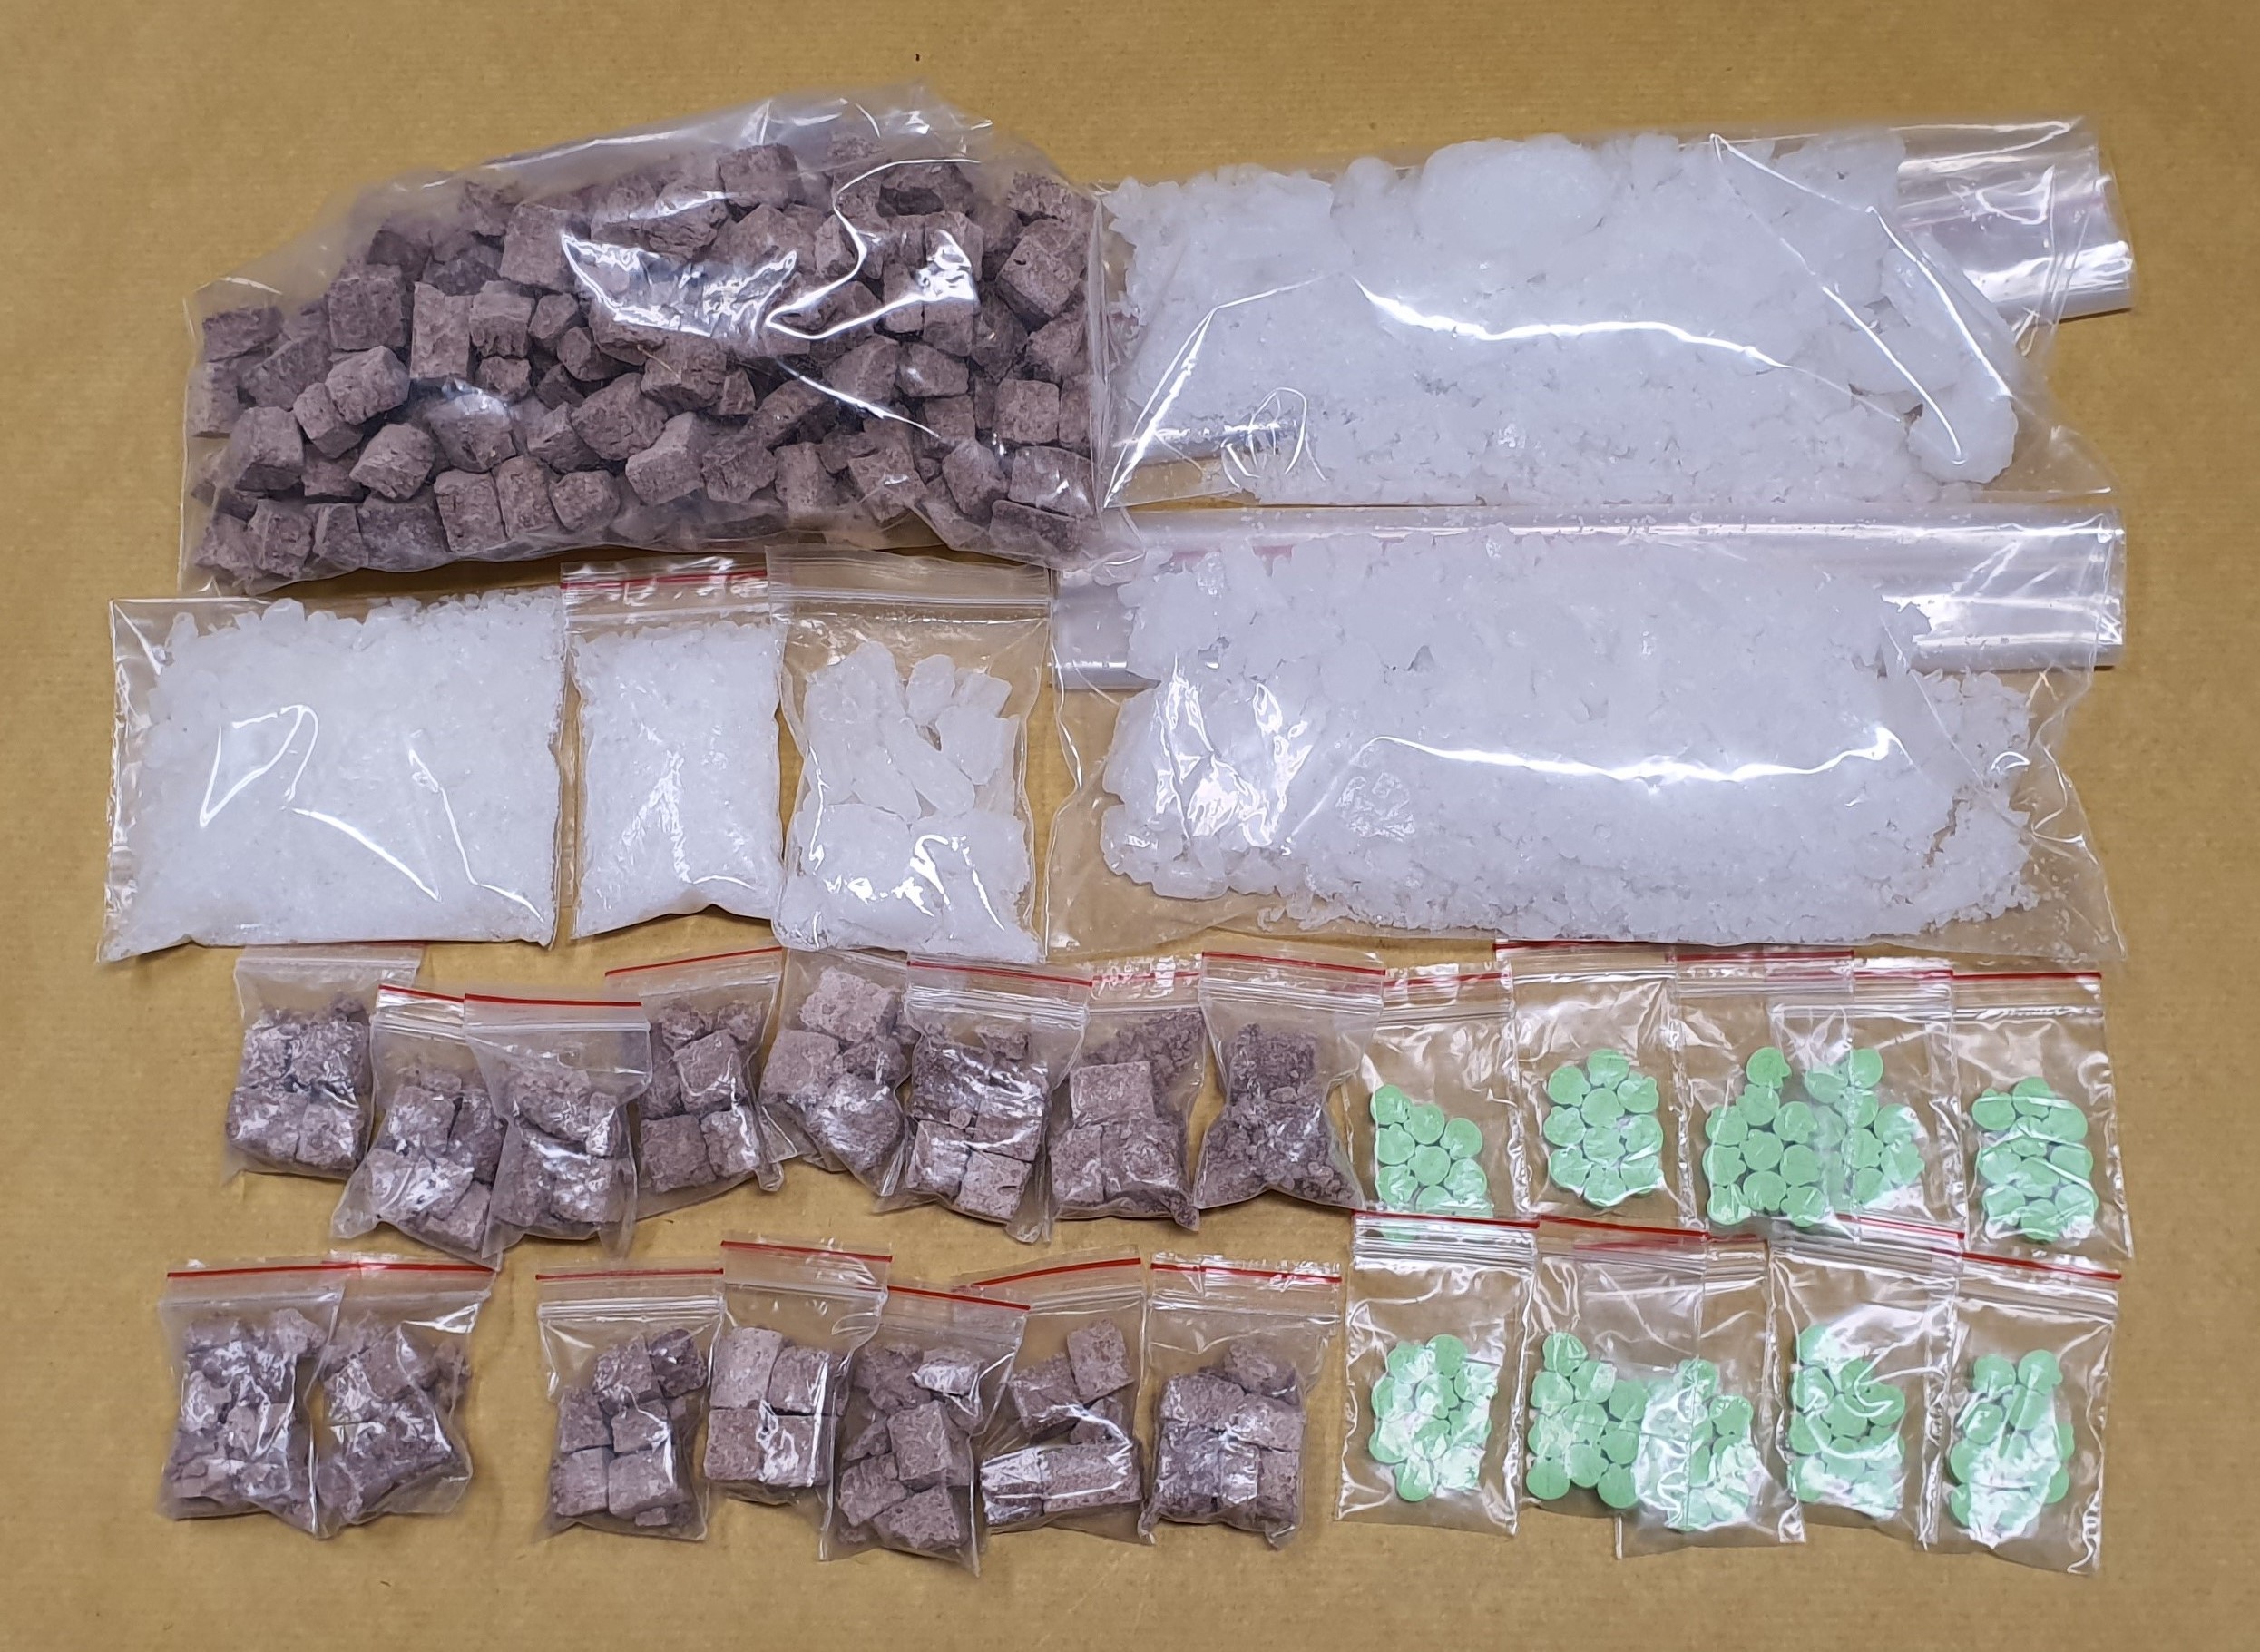 Some of the drugs seized in CNB operation on 11 February 2020